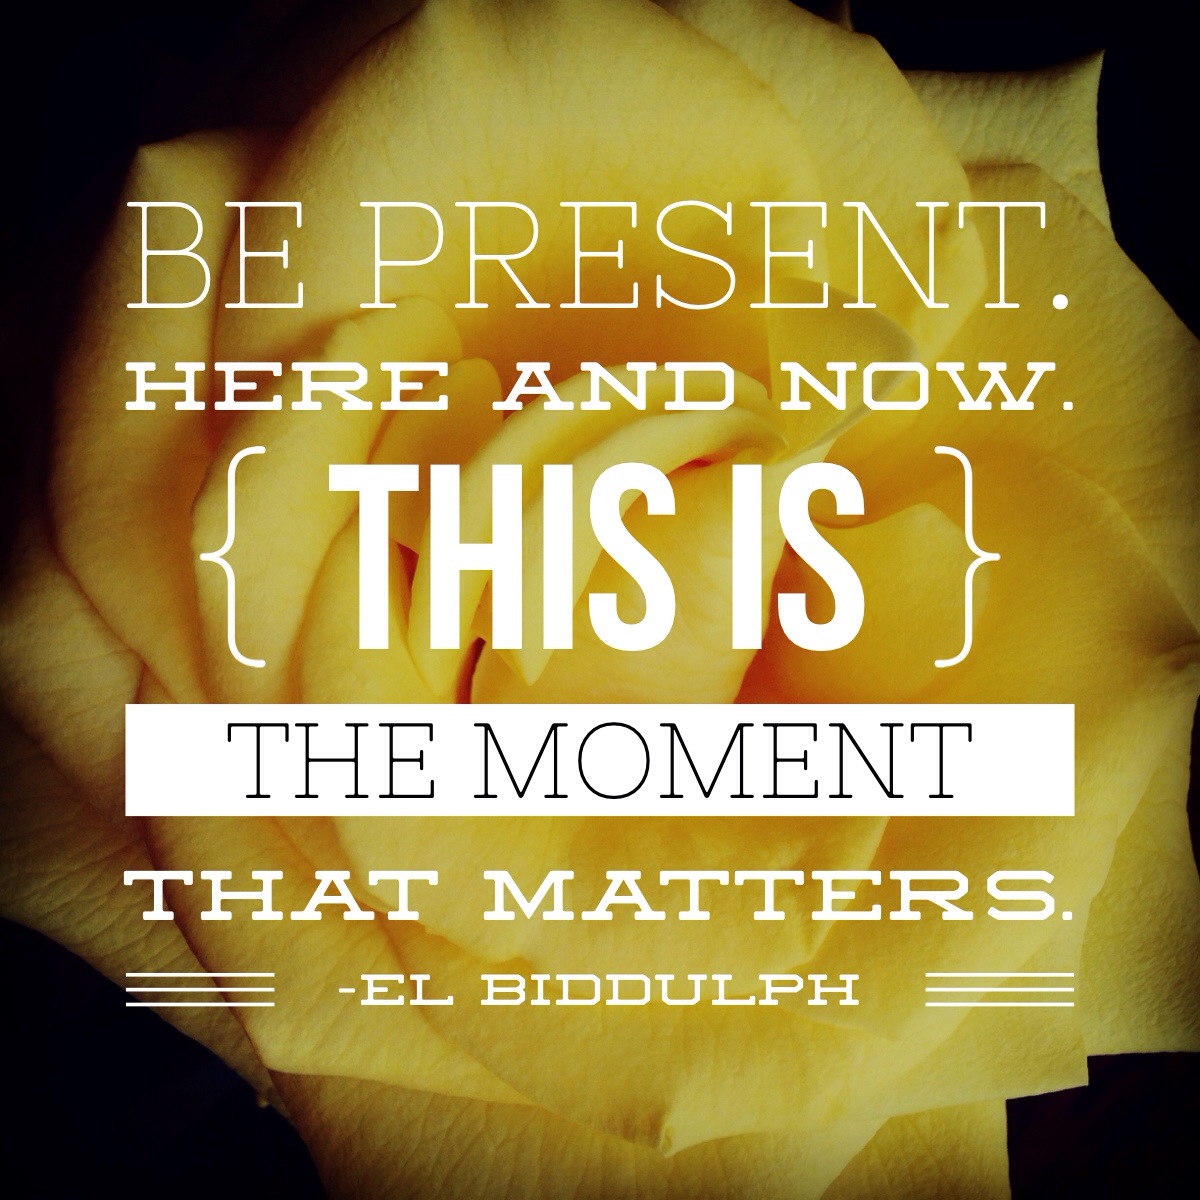 Be present here and now